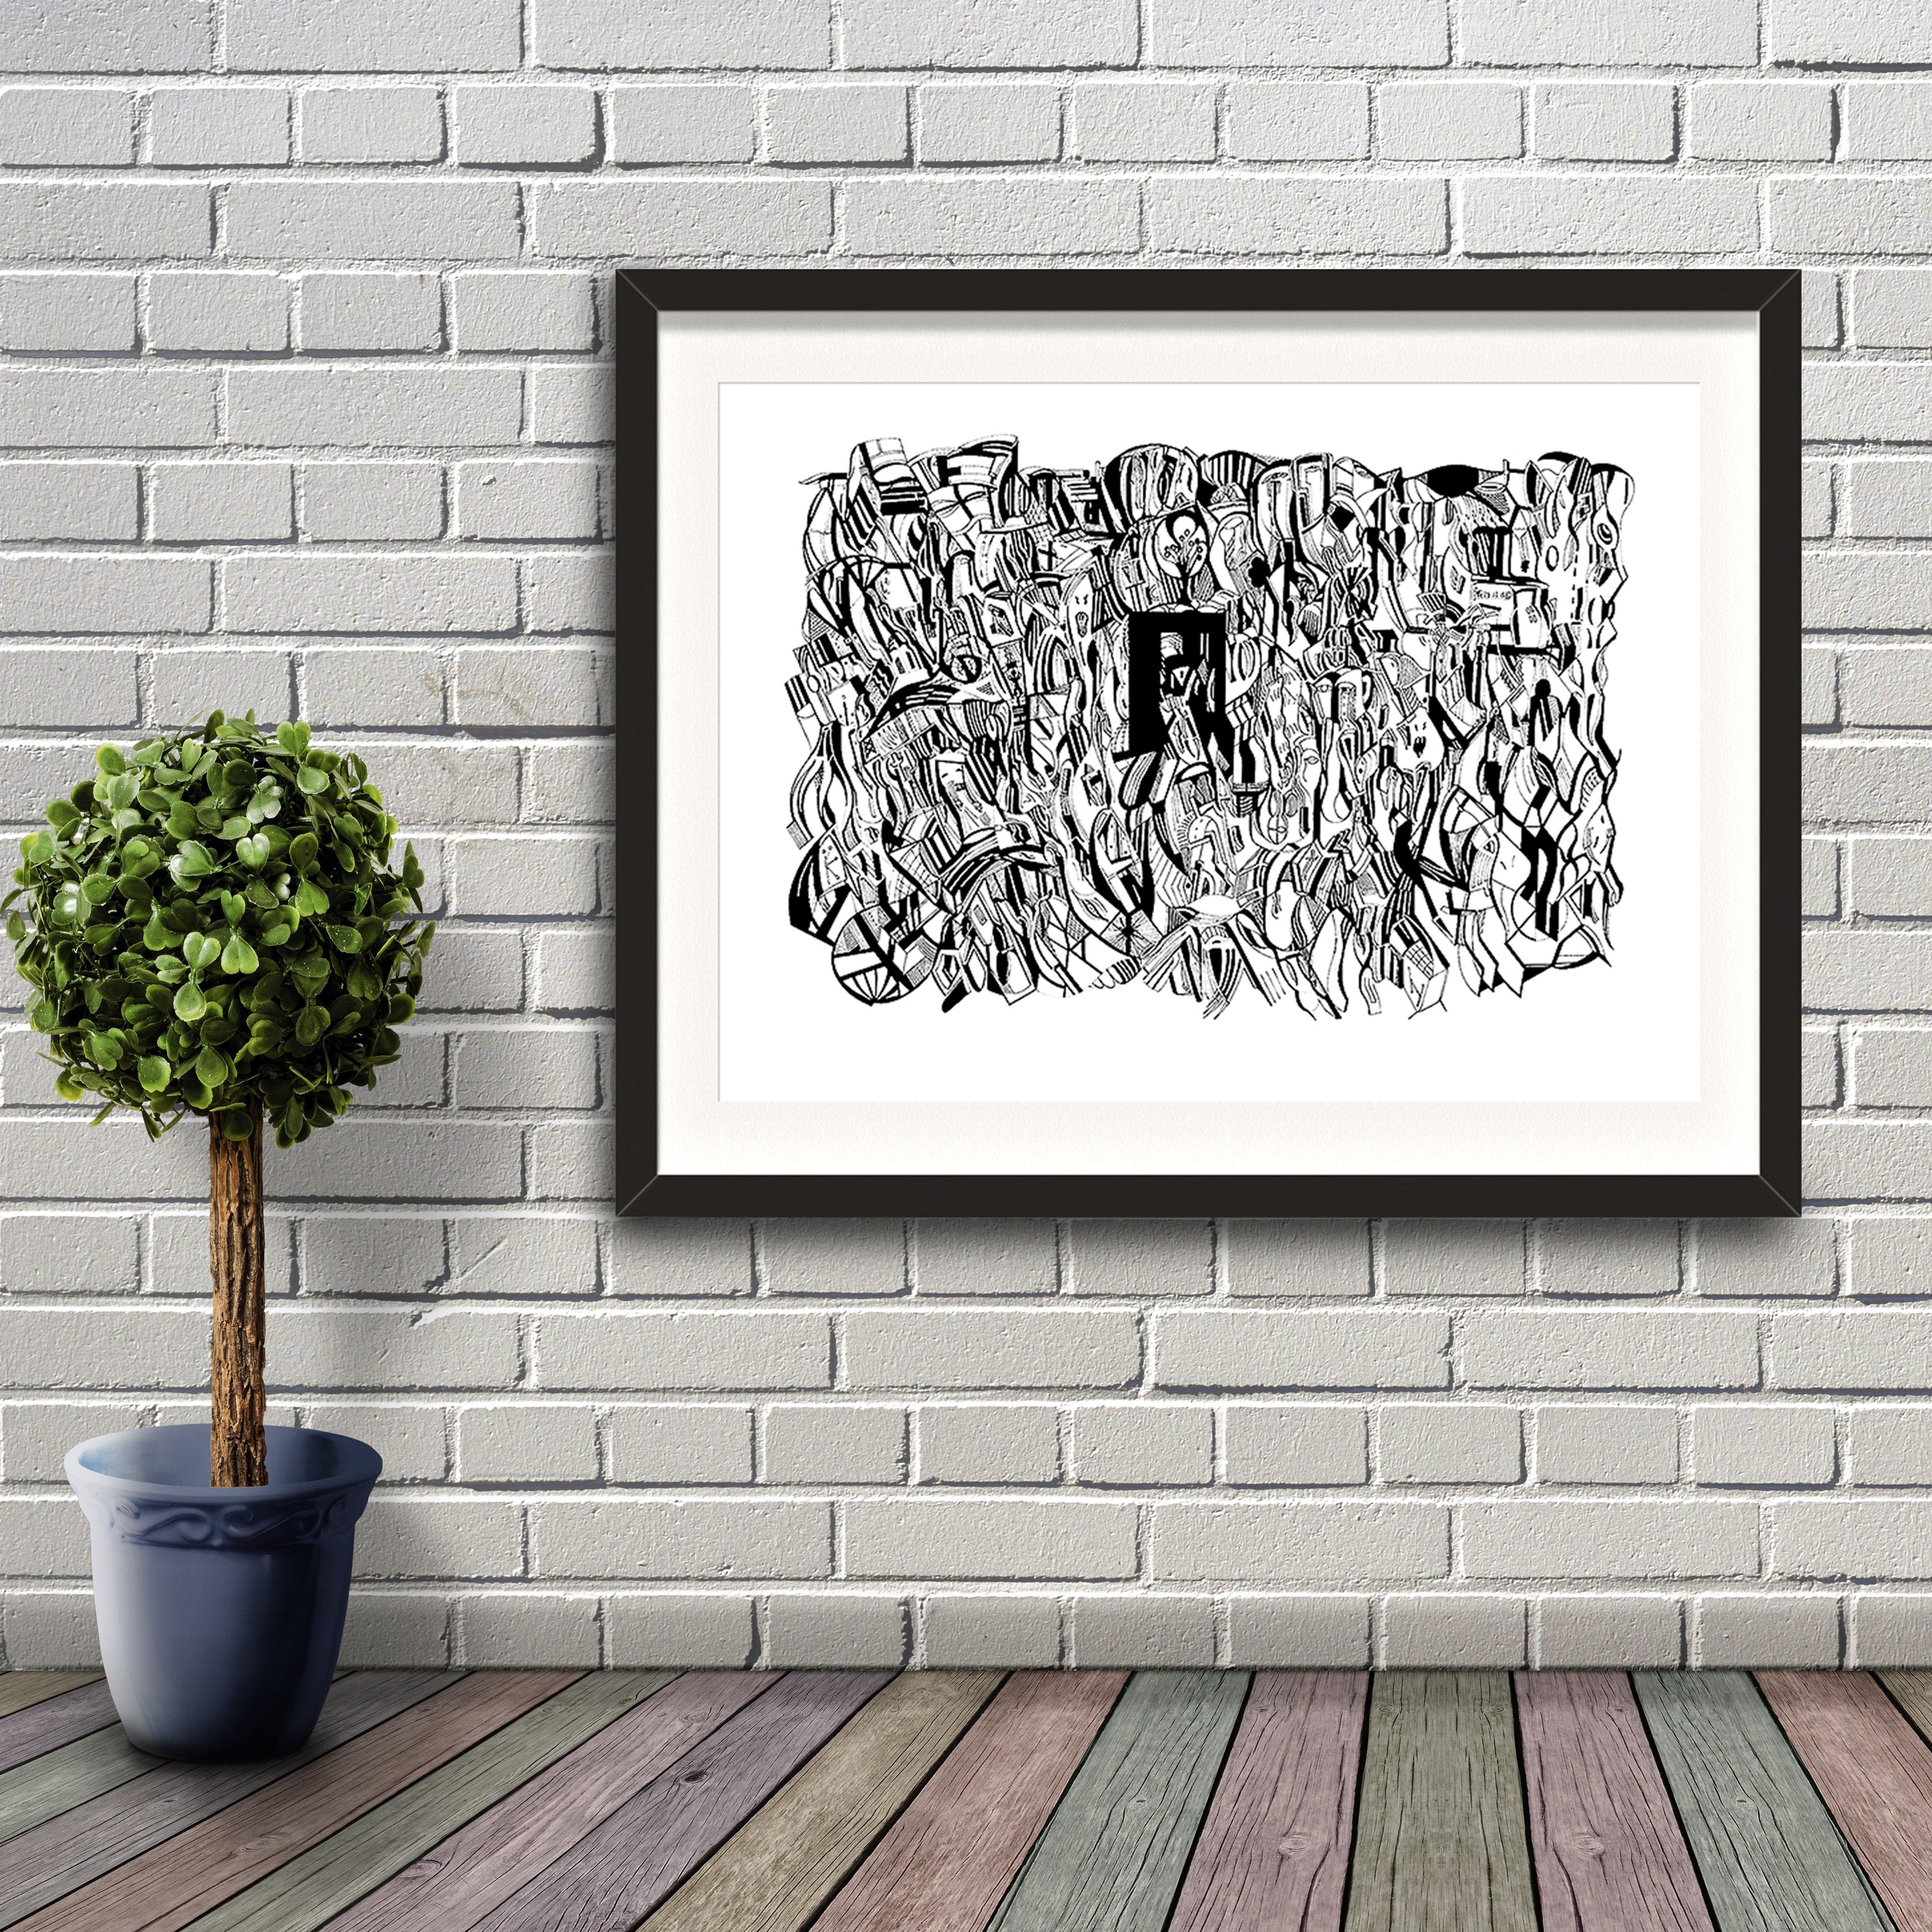 A fine art print from Jason Clarke titled Totally Messed Up drawn with a black Pentel pen. Dated 28/12/15. Artwork shown in a black frame hanging on a brick wall.